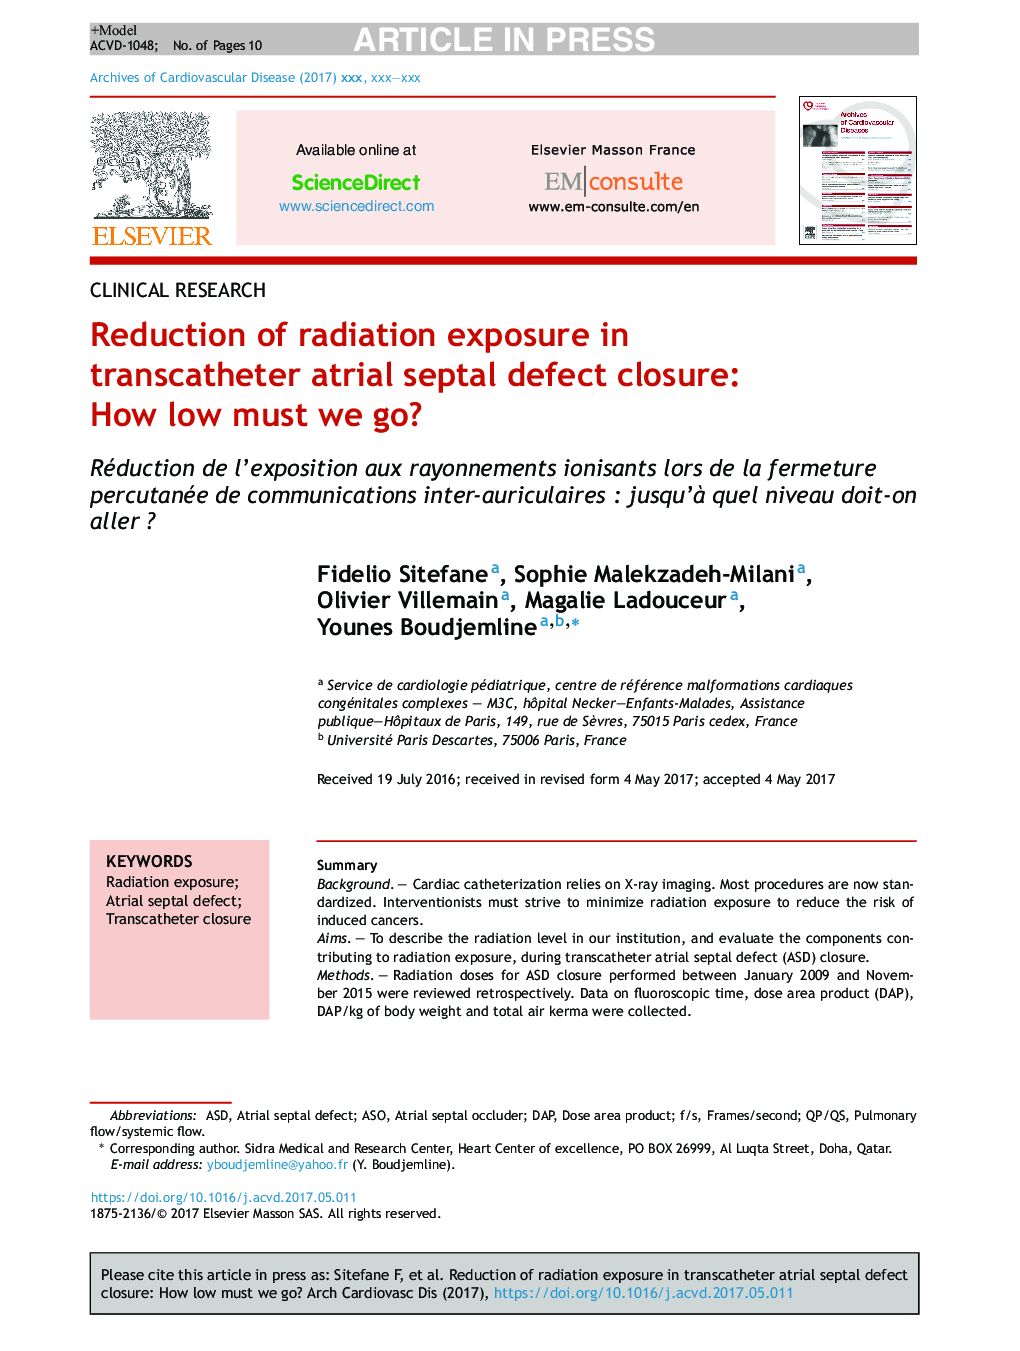 Reduction of radiation exposure in transcatheter atrial septal defect closure: How low must we go?